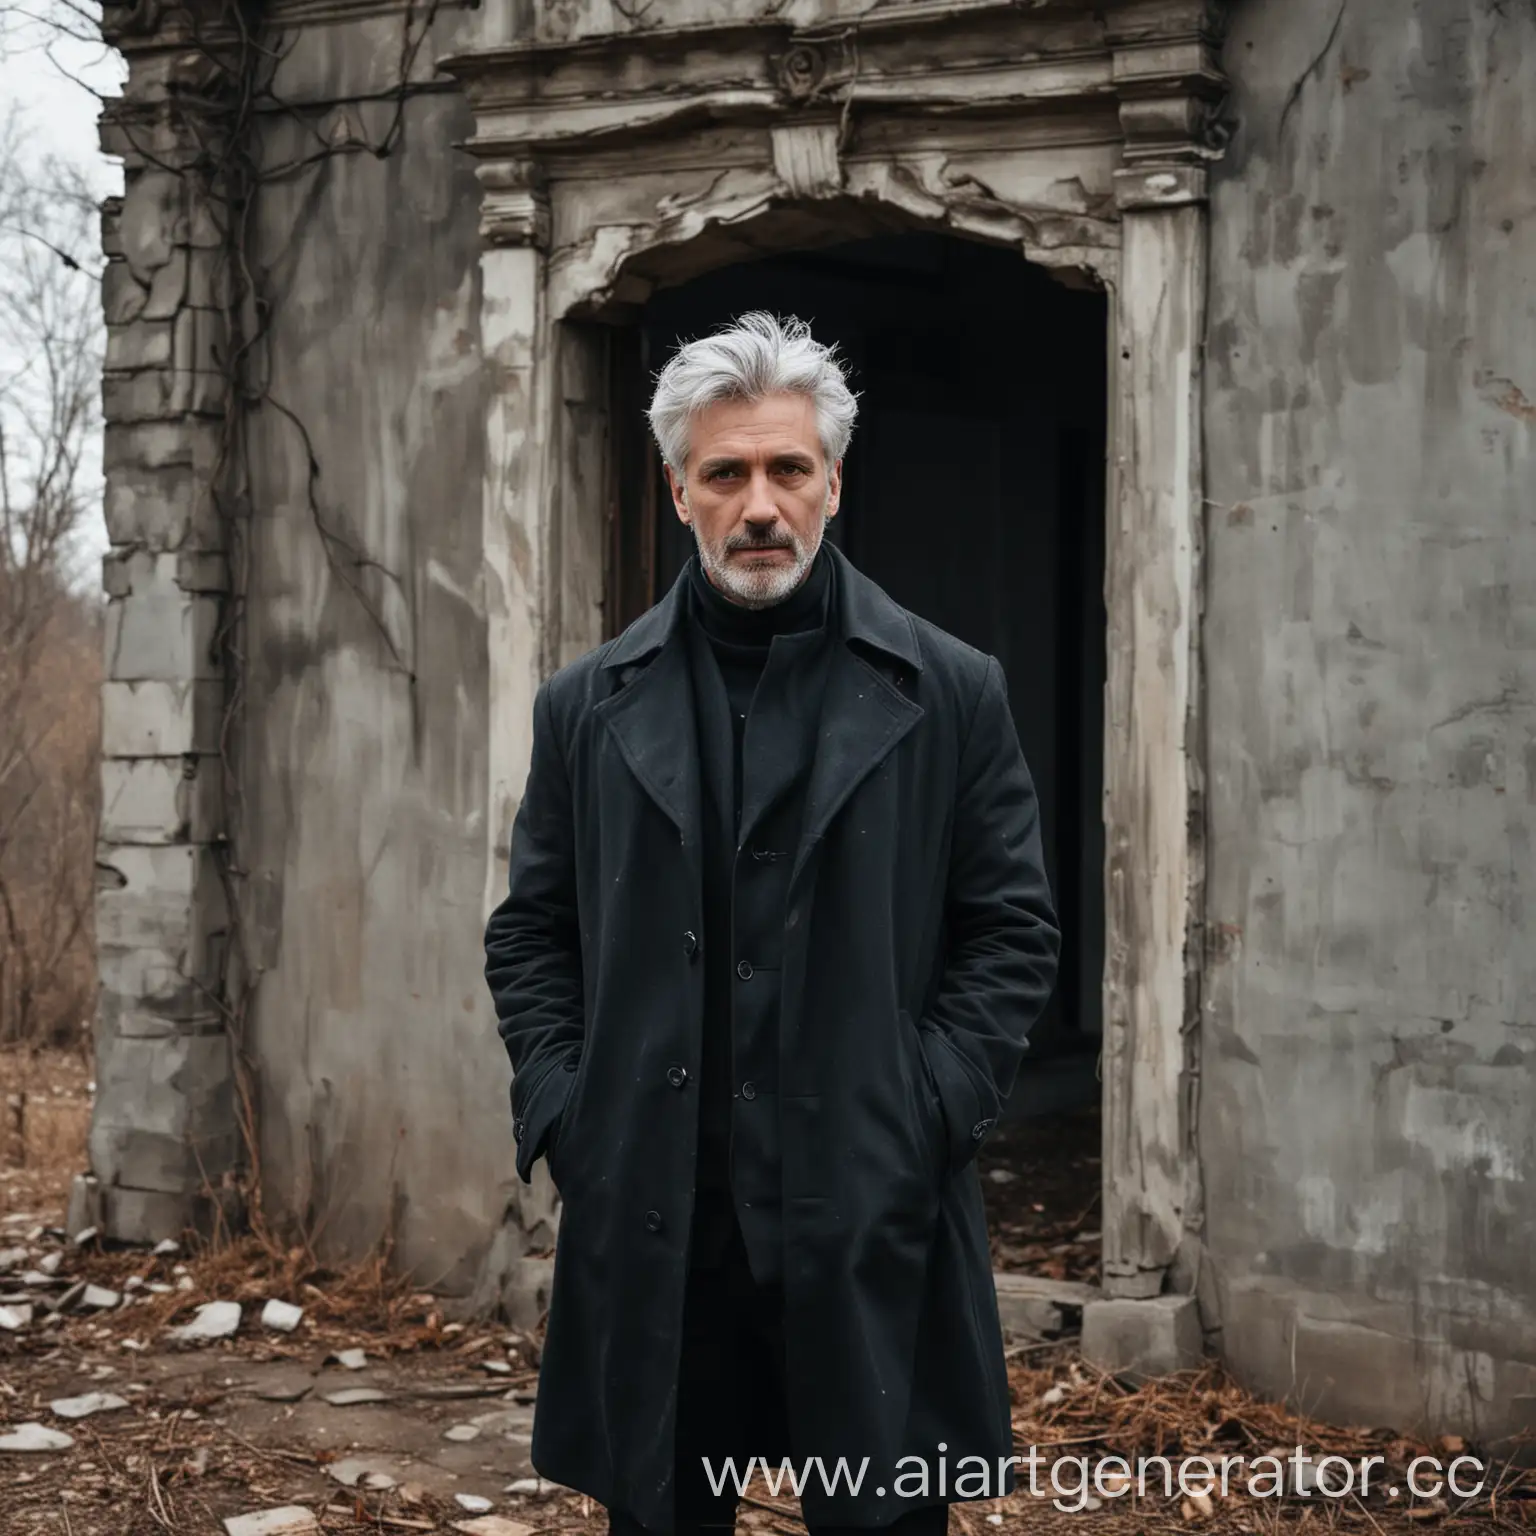 Abandoned-Beautiful-House-with-a-GrayHaired-Man-in-a-Black-Coat